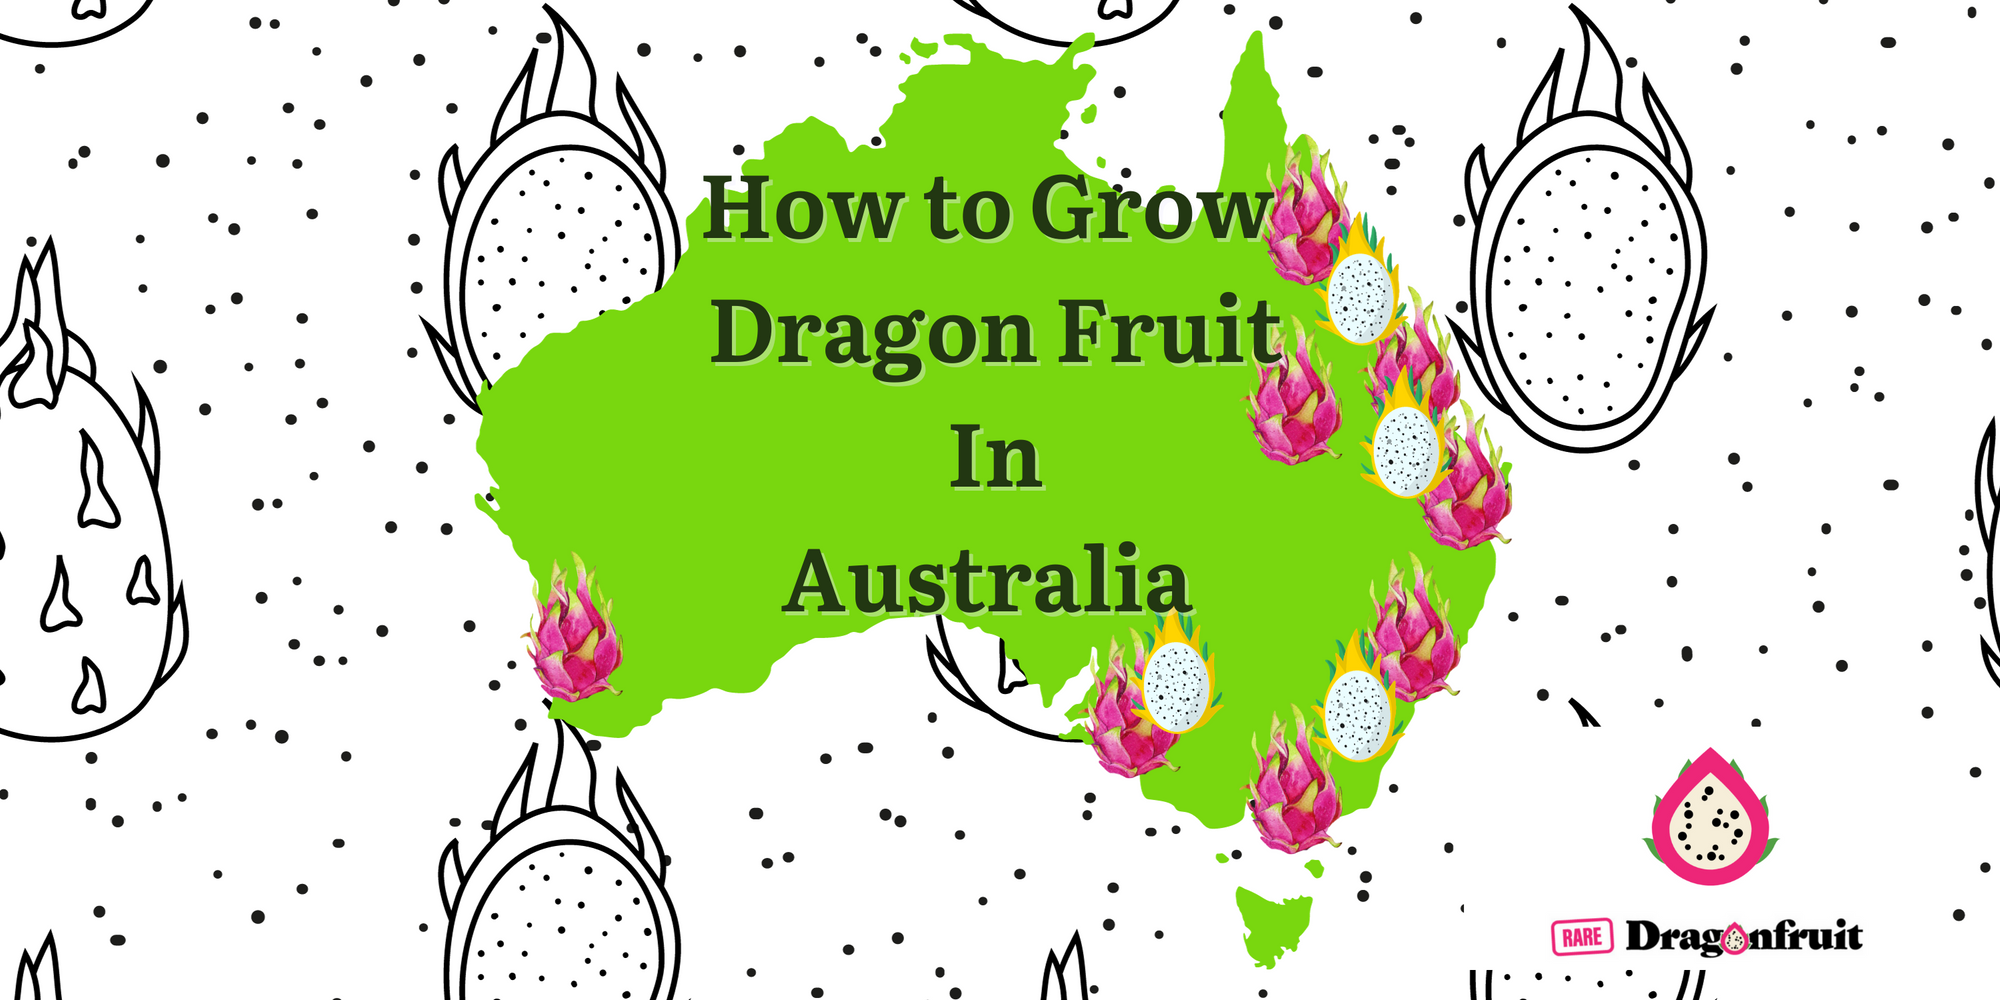 Growing Dragon Fruit in Australia the Experiment